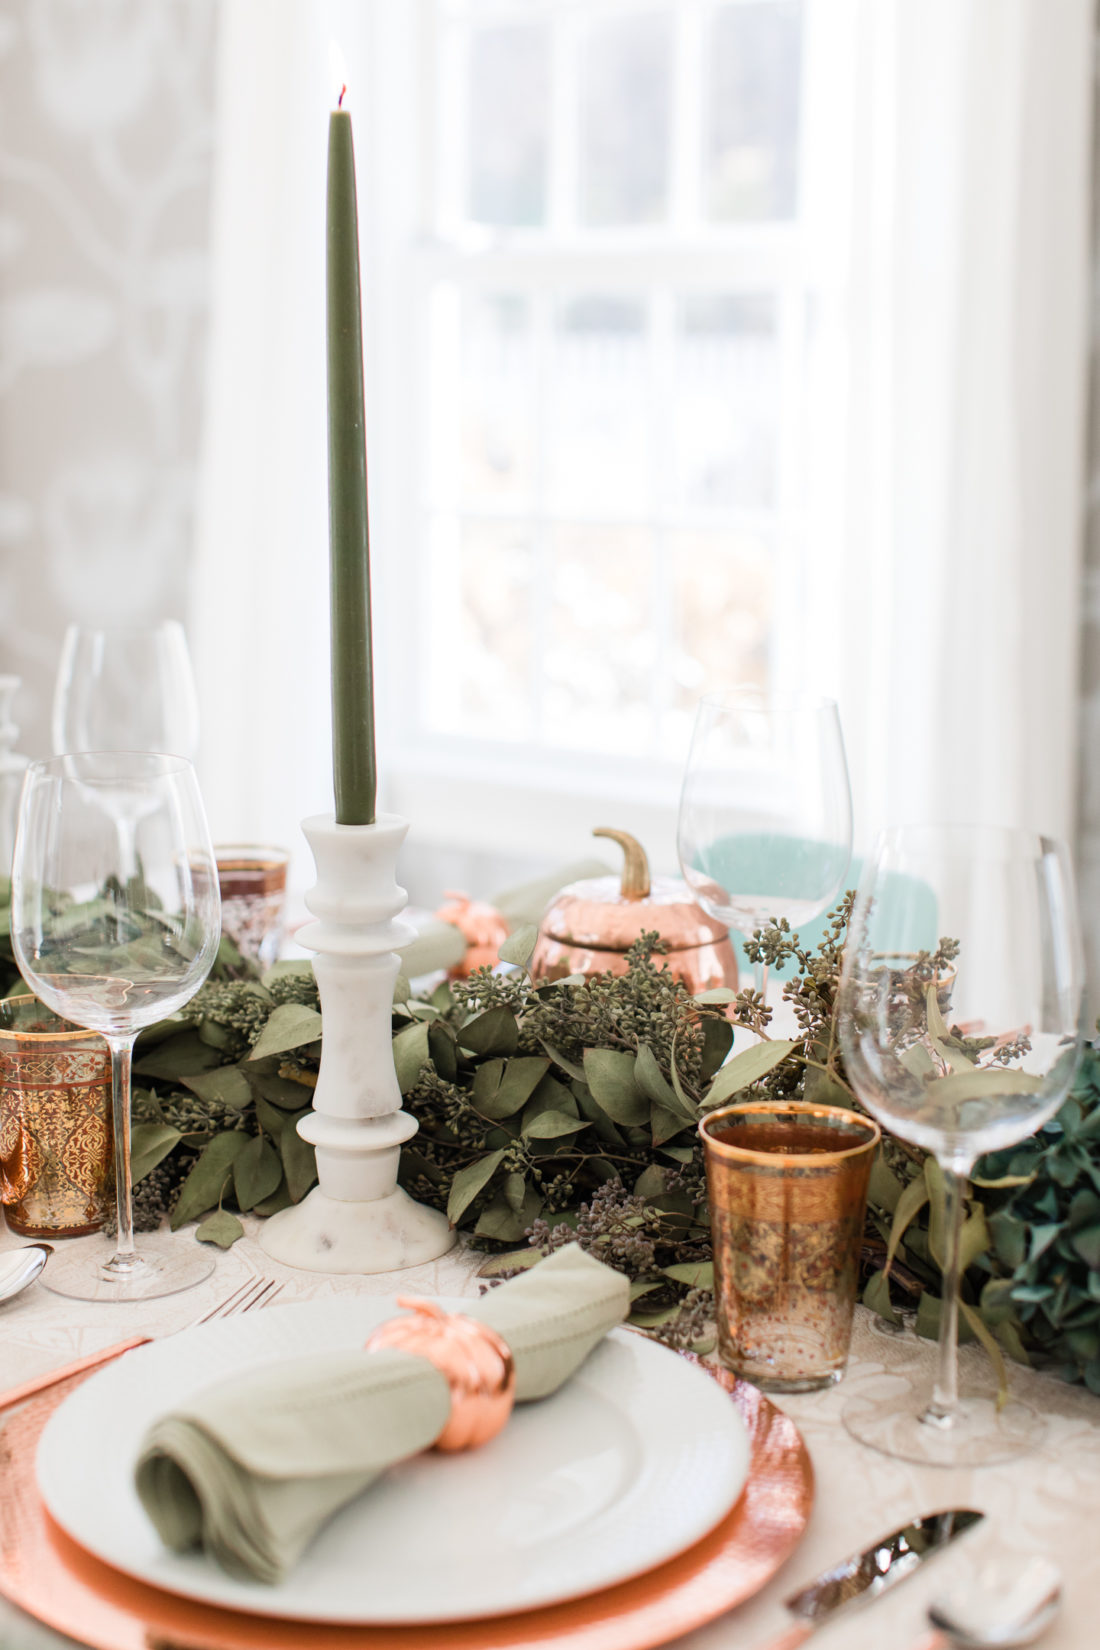 A eucaluptus garland, marble candlesticks with green candles, and a green and copper color scheme add style to Eva Amurri Martino's thanksgiving table